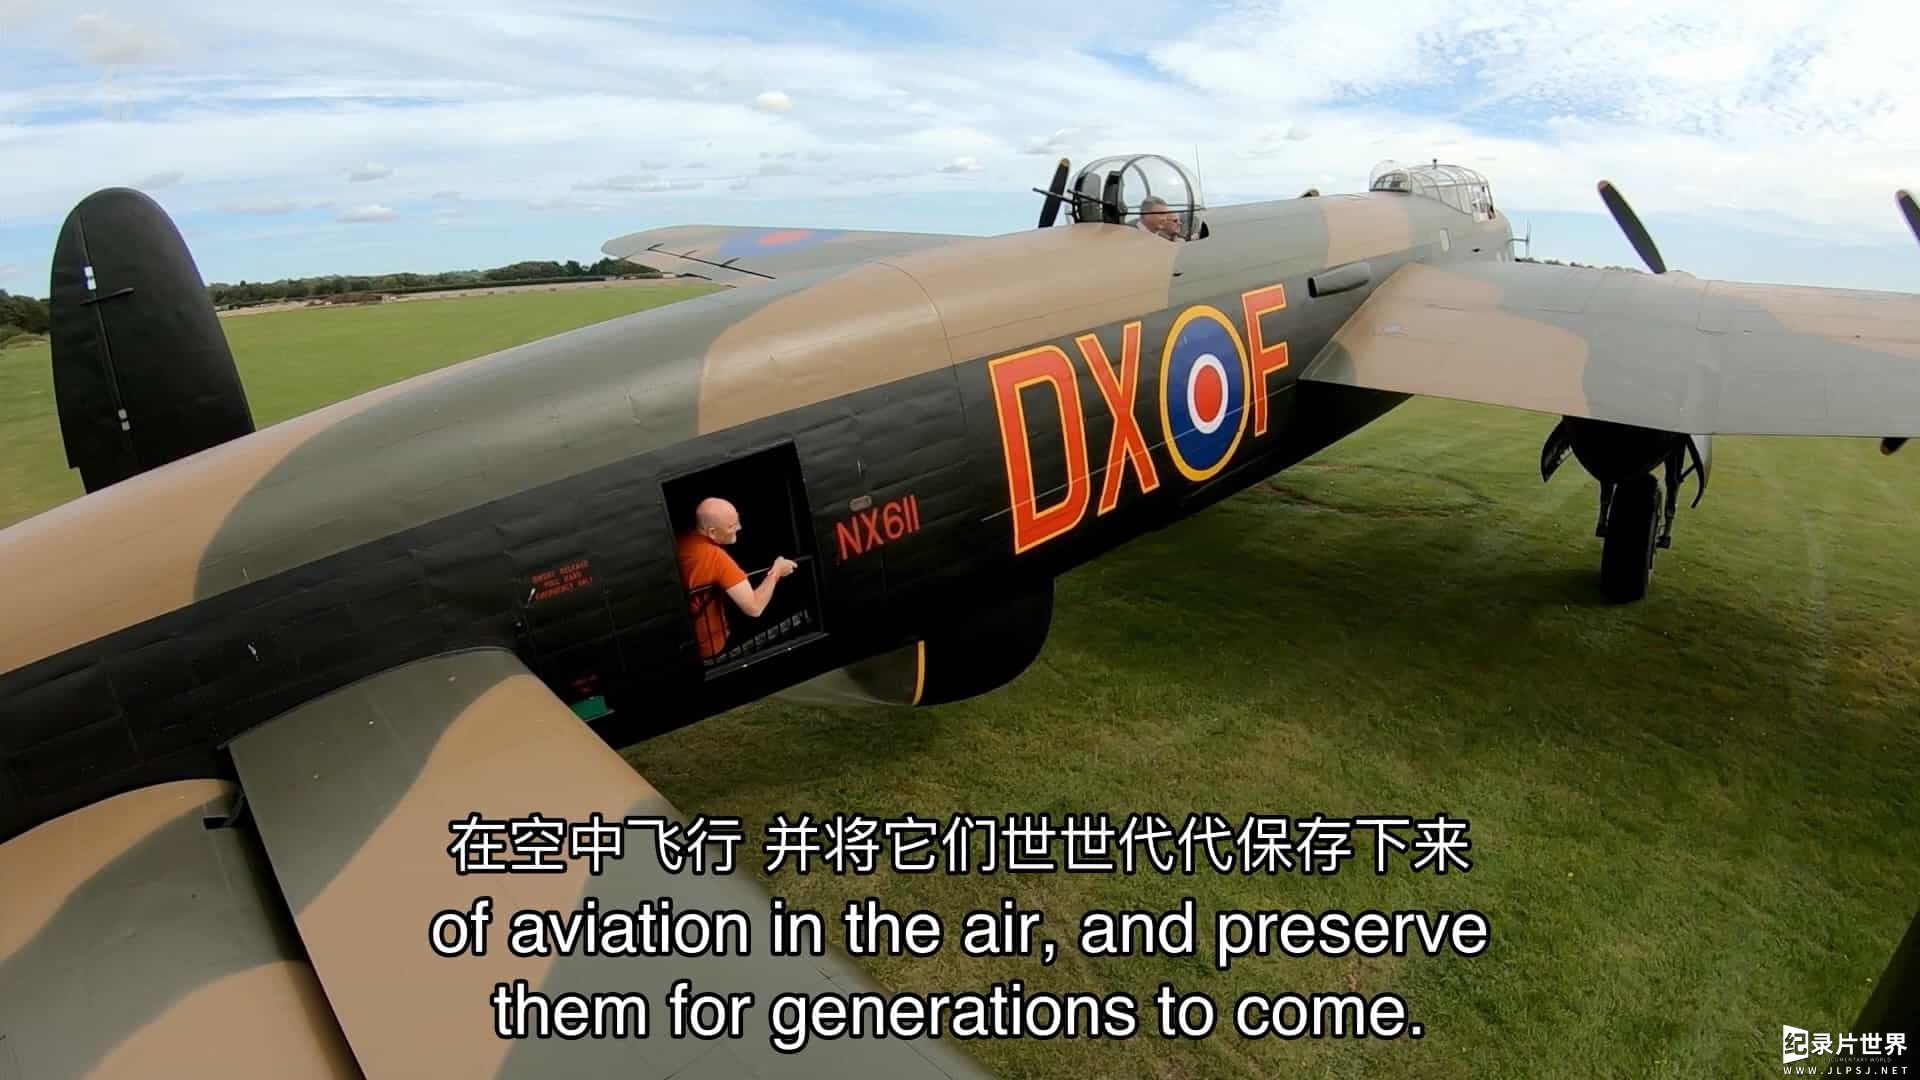 Ch5纪录片《塑造英国的飞机 The Planes That Built Britain with Rob Bell 2022》第1季全4集